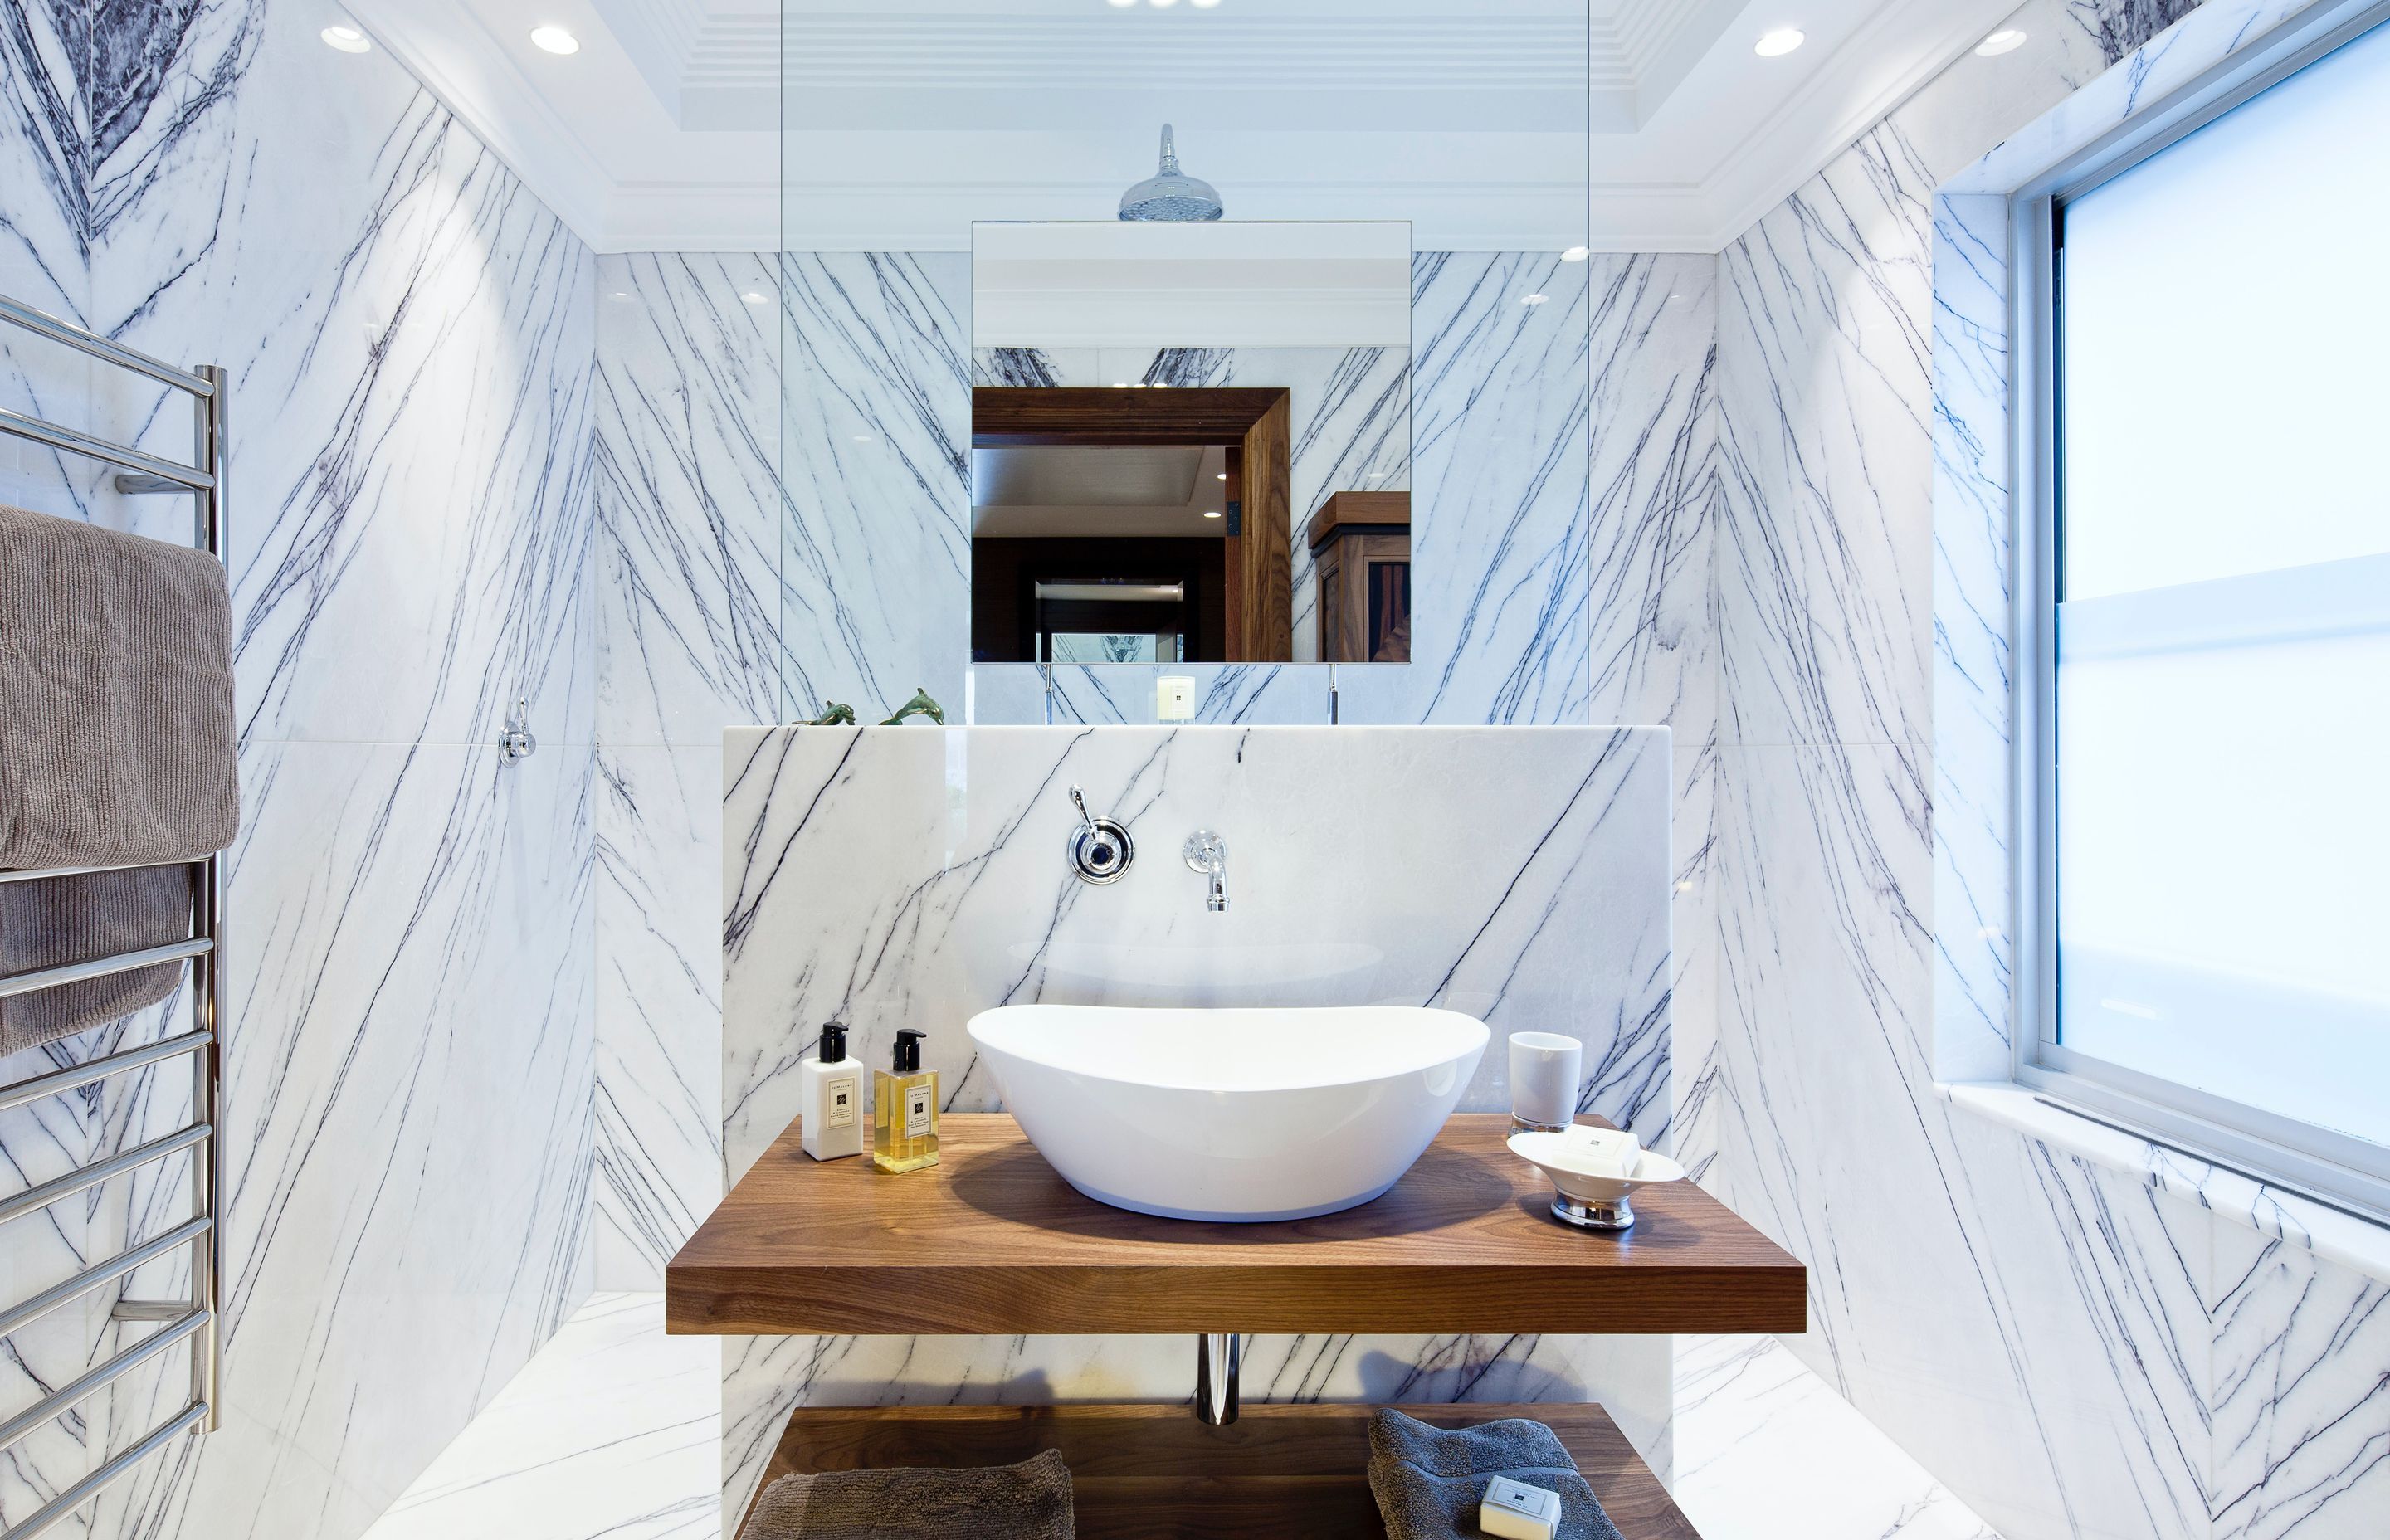 How to save money on a high-end bathroom renovation